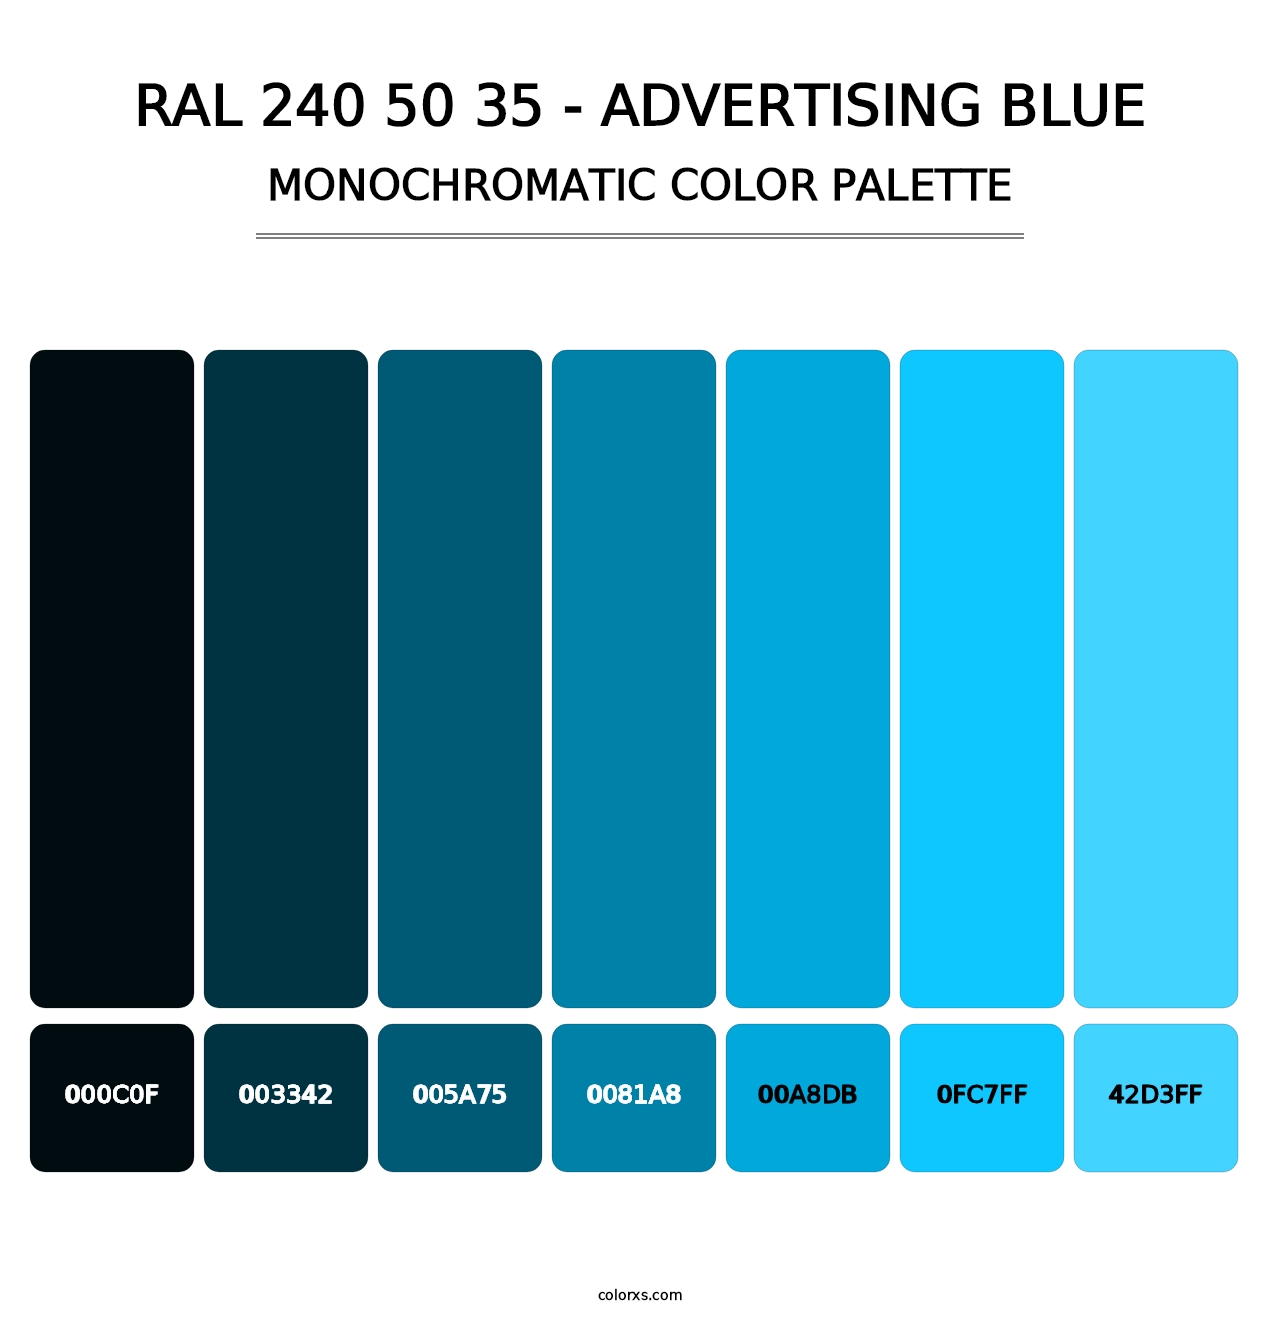 RAL 240 50 35 - Advertising Blue - Monochromatic Color Palette